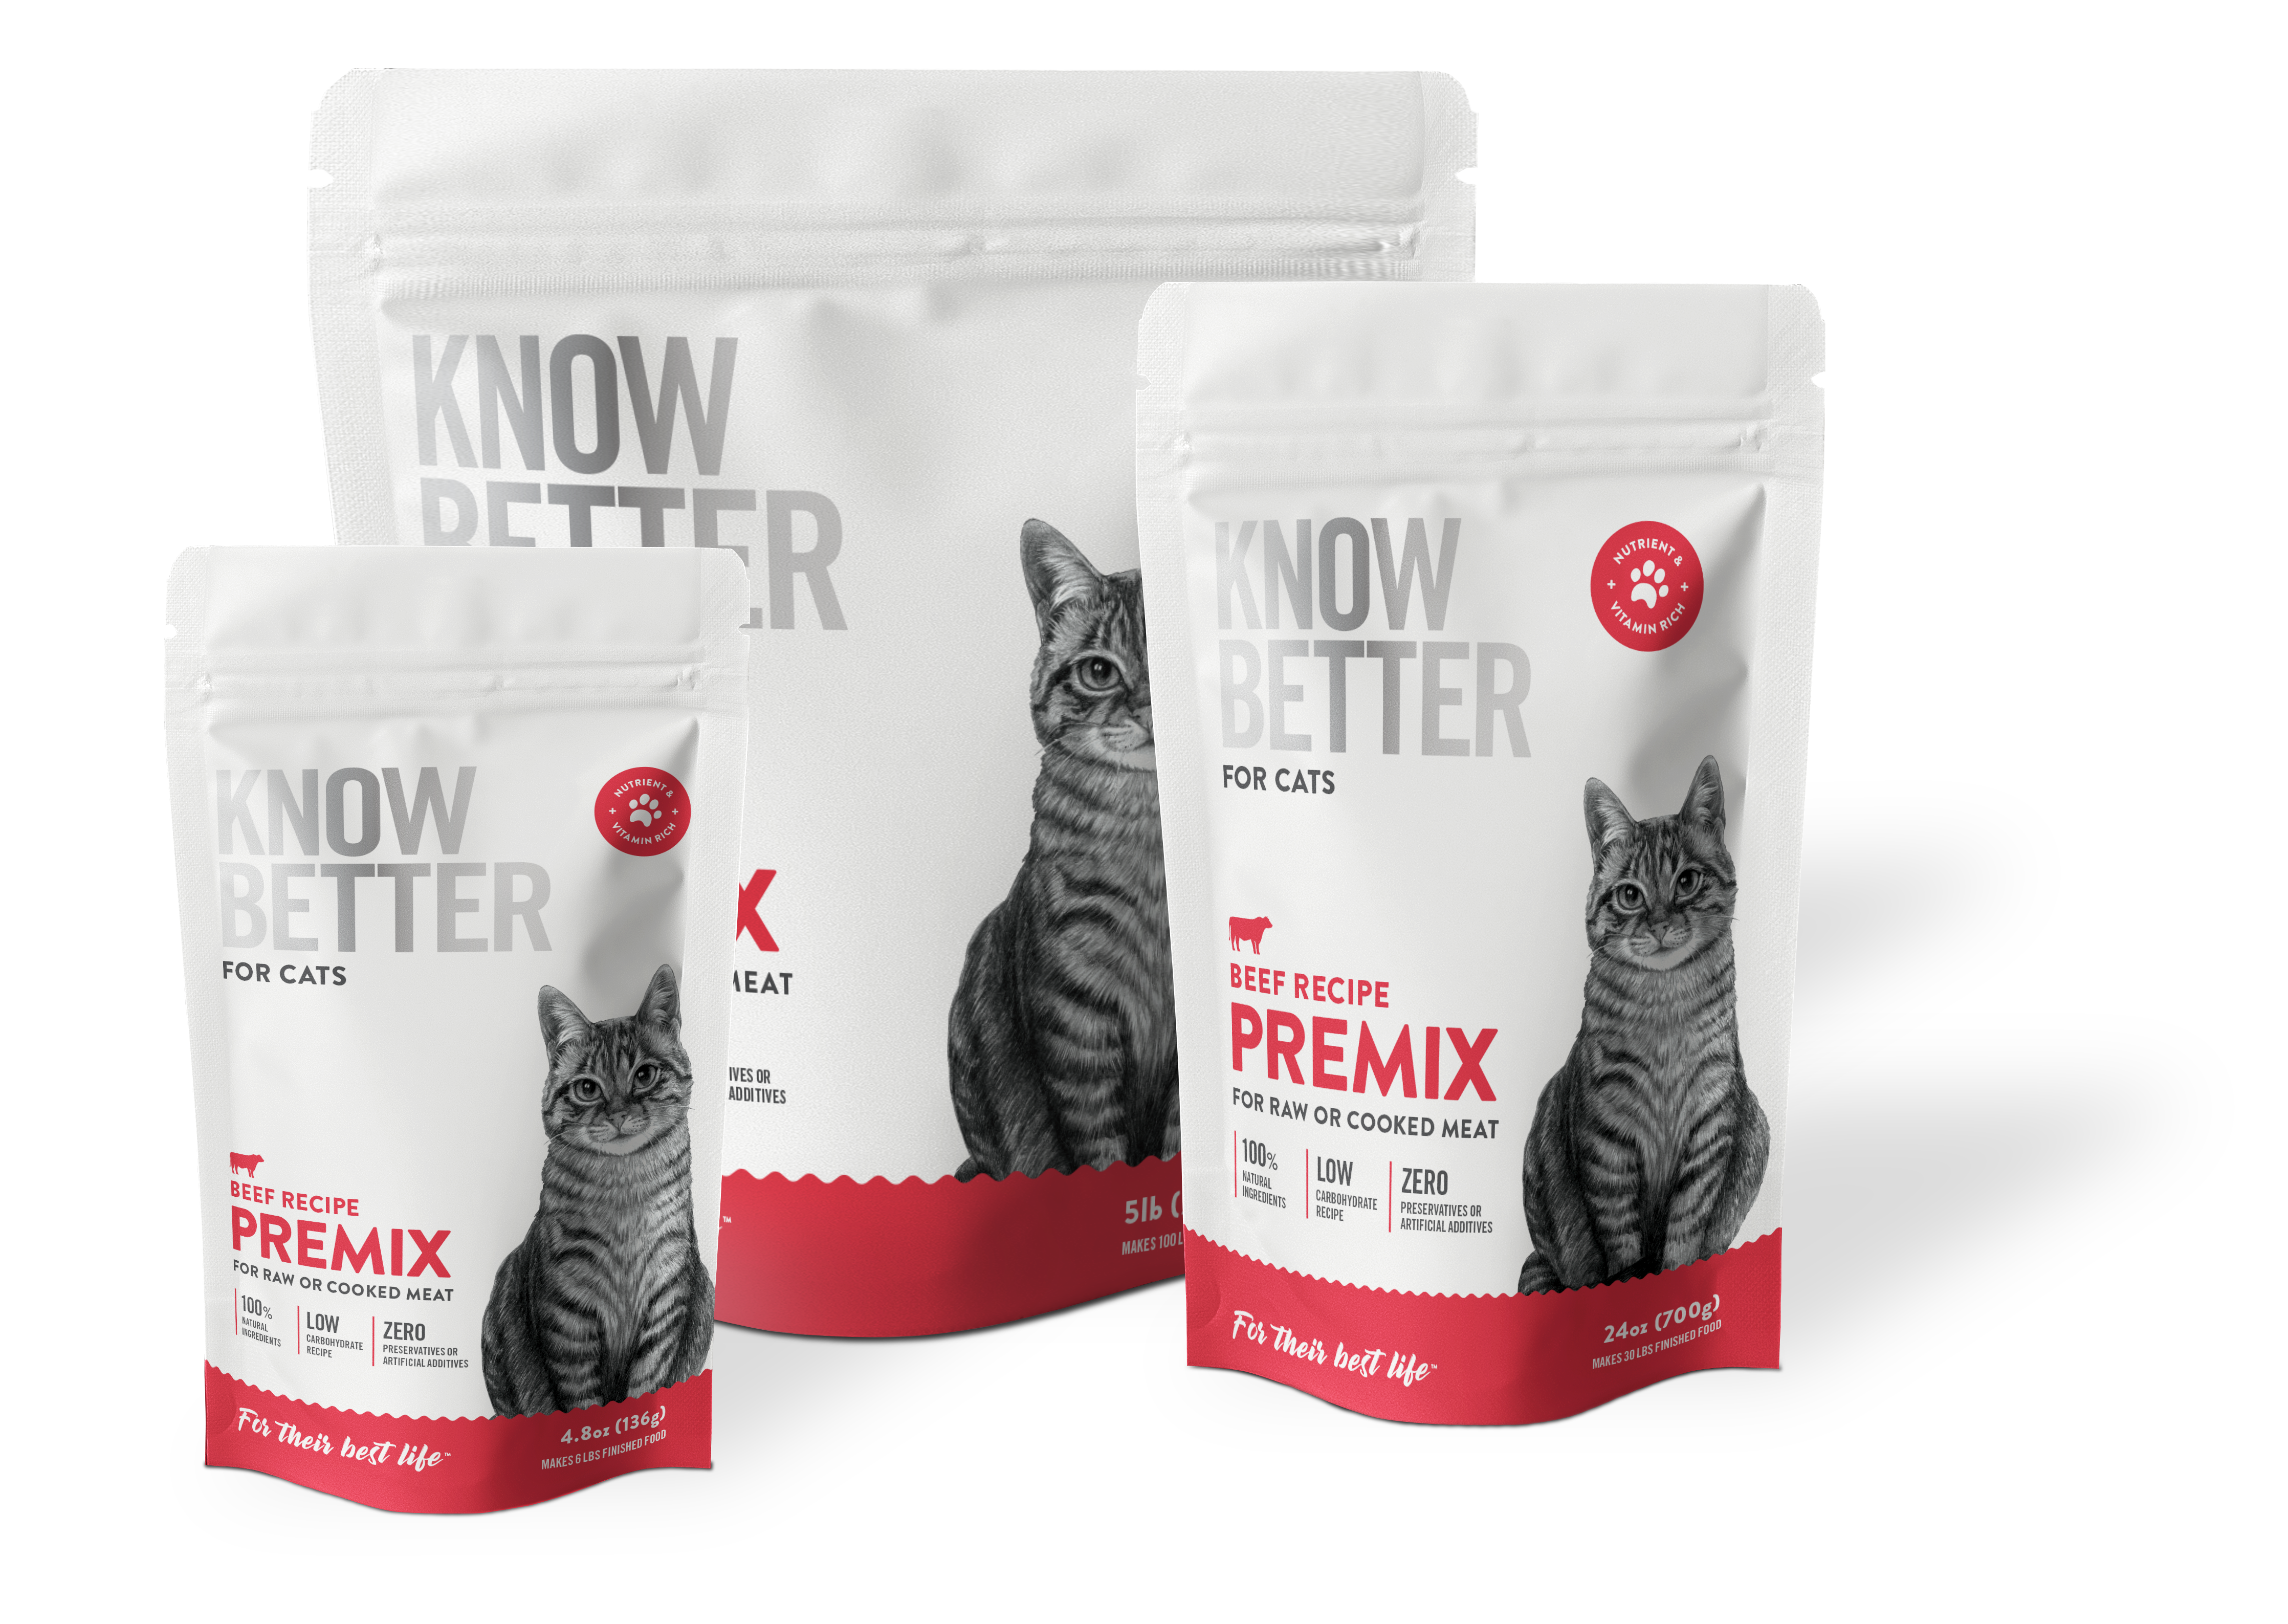 Know Better for Cats - Beef Recipe - For making a healthy homemade cat food